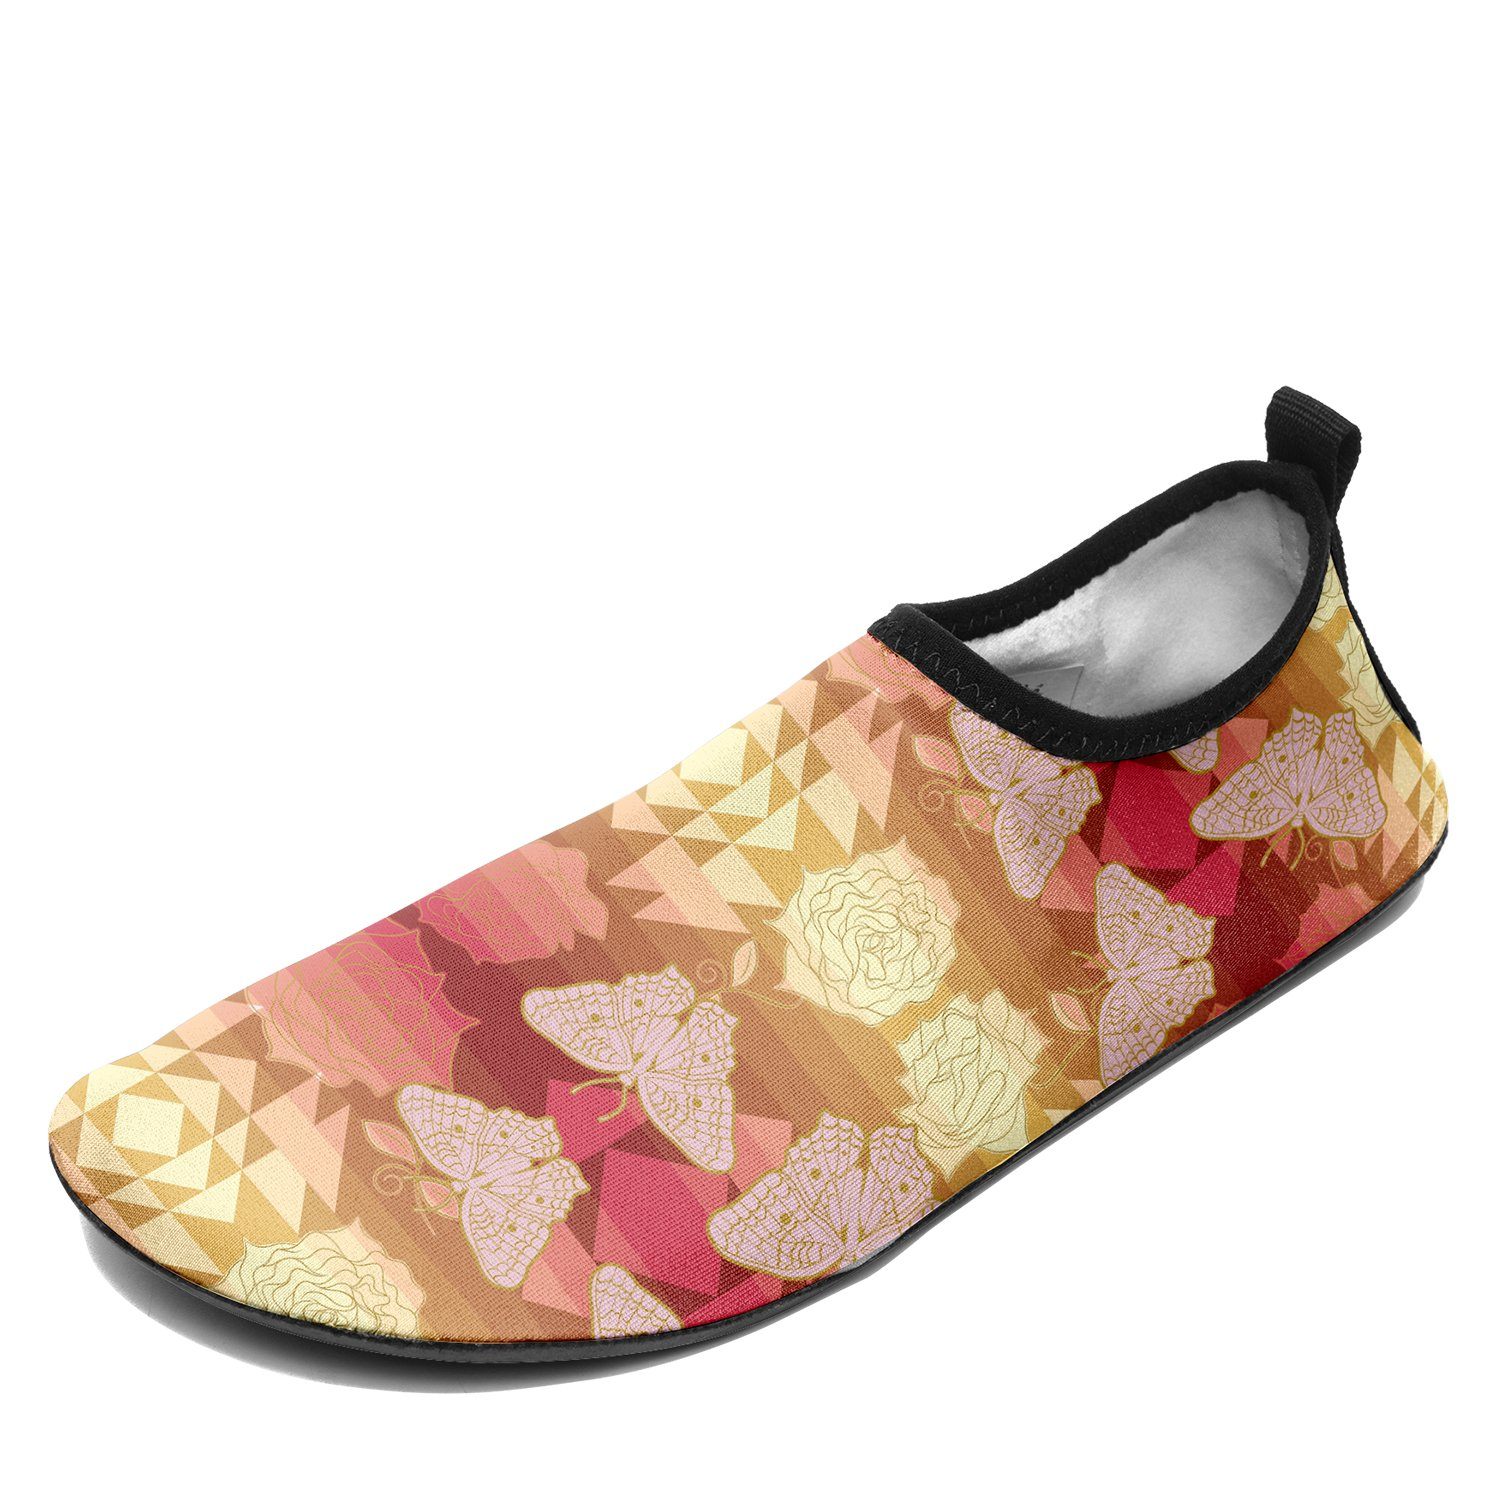 Butterfly and Roses on Geometric Sockamoccs Slip On Shoes Herman 